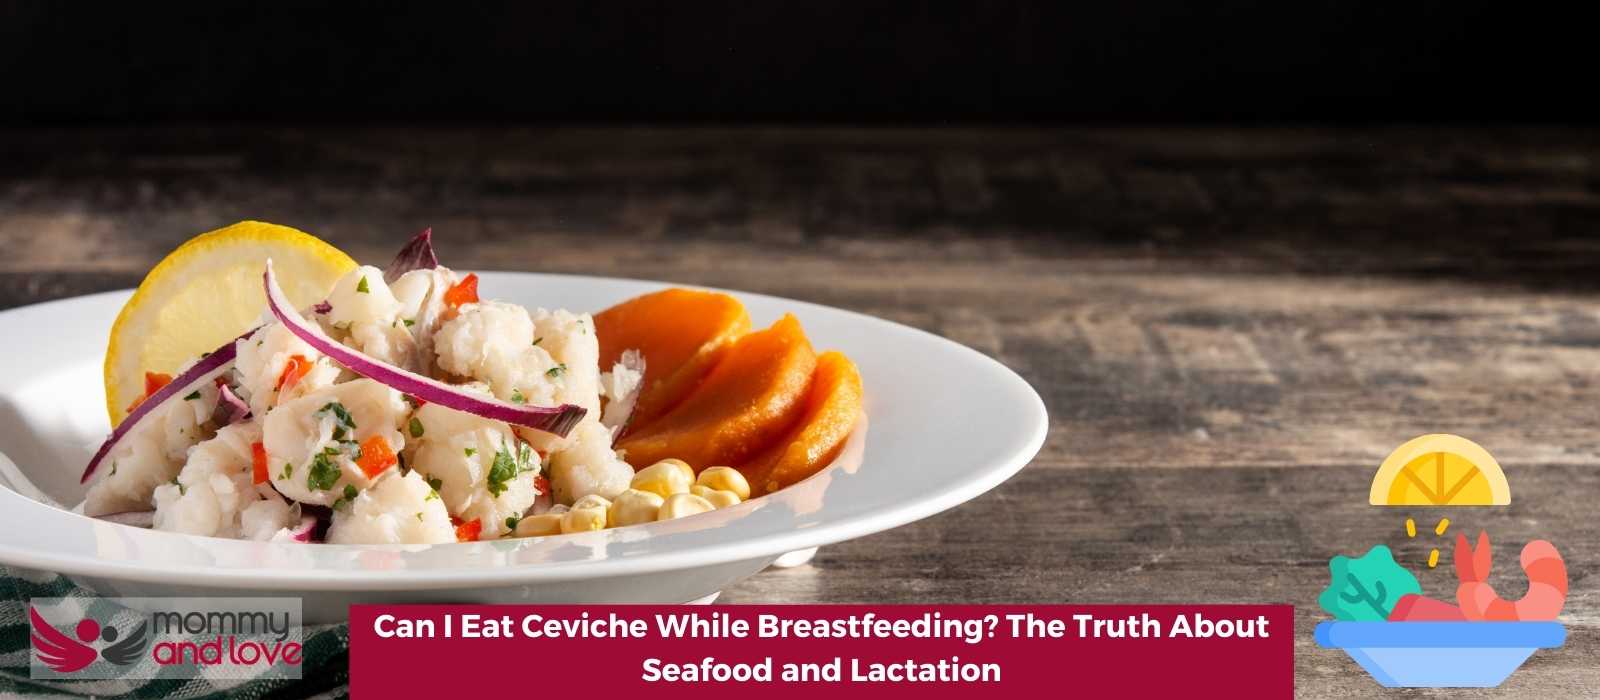 Can I Eat Ceviche While Breastfeeding The Truth About Seafood and Lactation